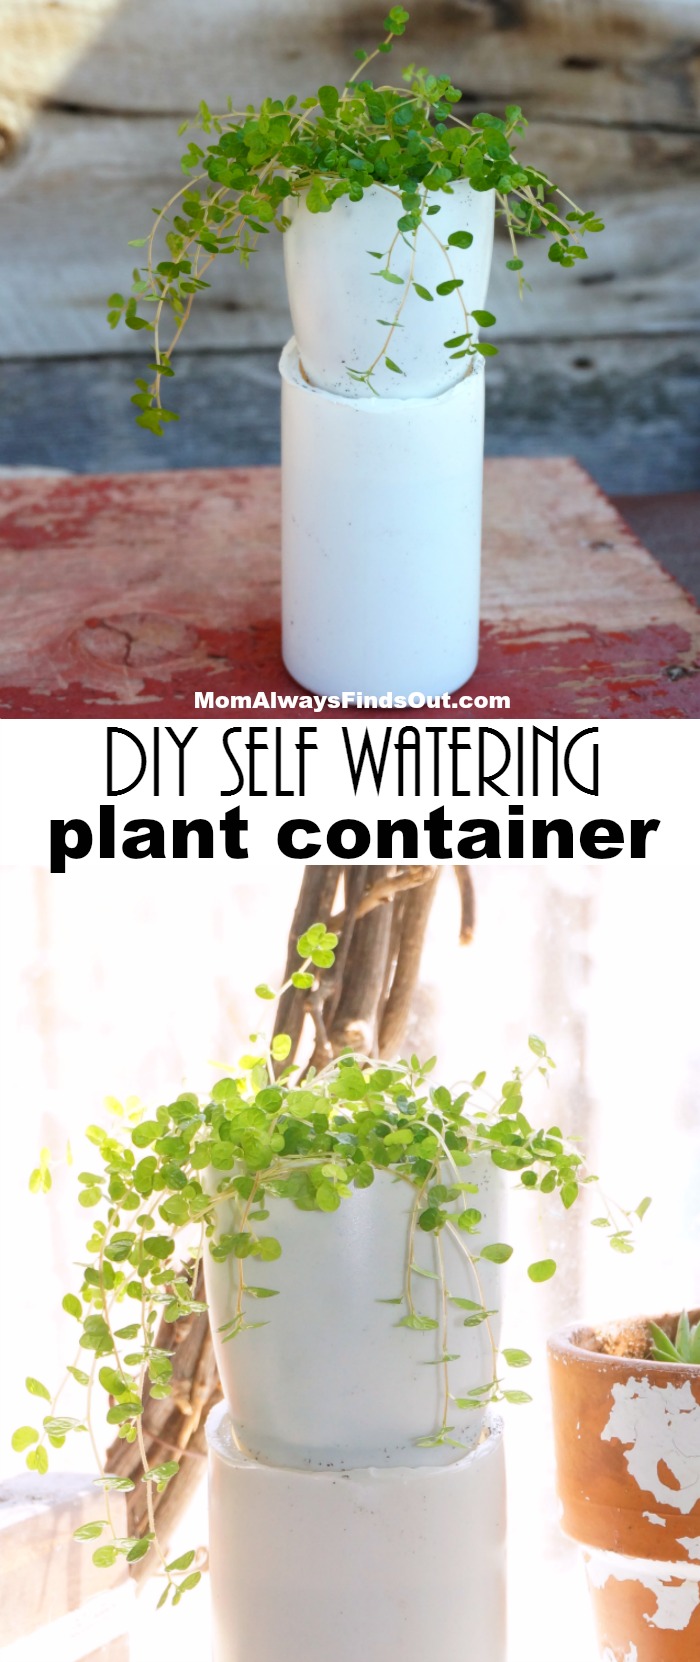 DIY Self Watering Plant Container Upcycling Plastic Bottle Craft Idea